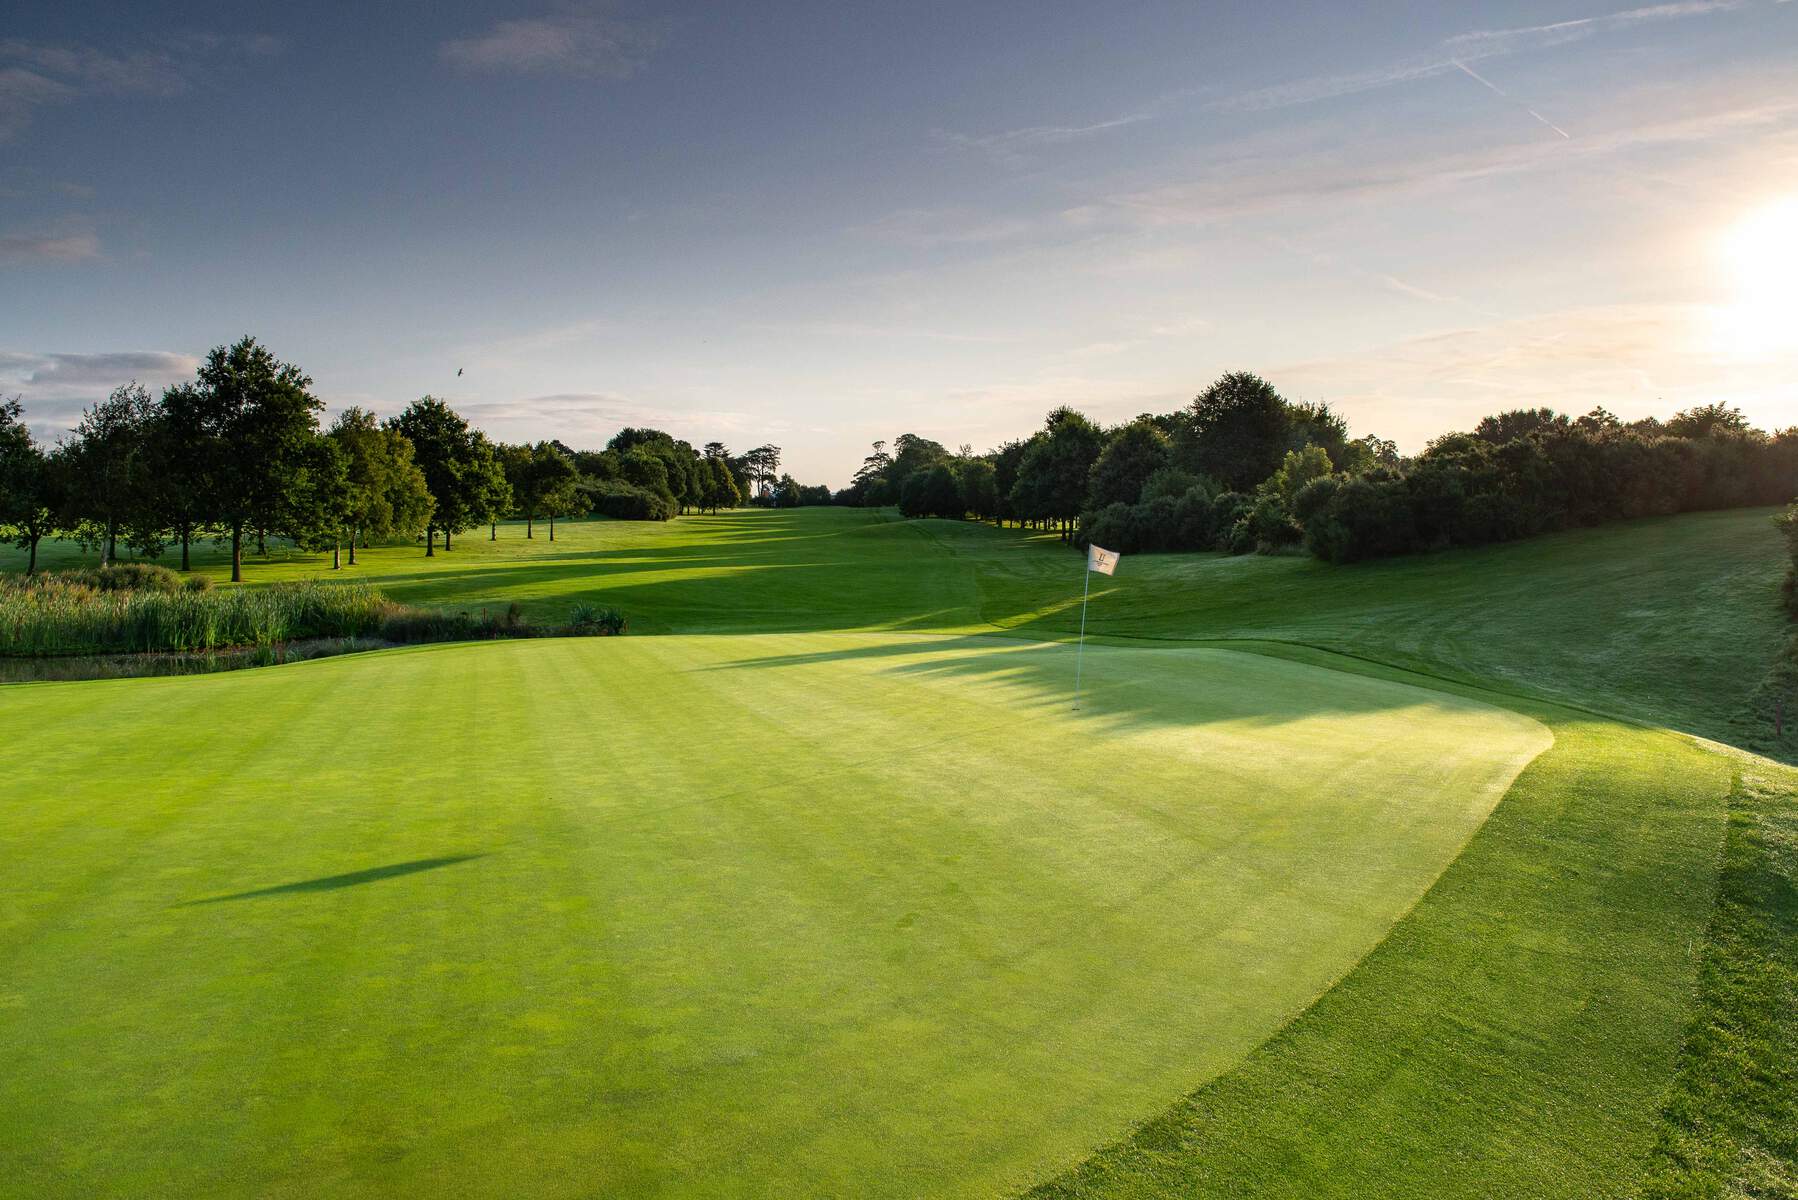 View of the golfing greens at Luttrellstown Castle Resort.